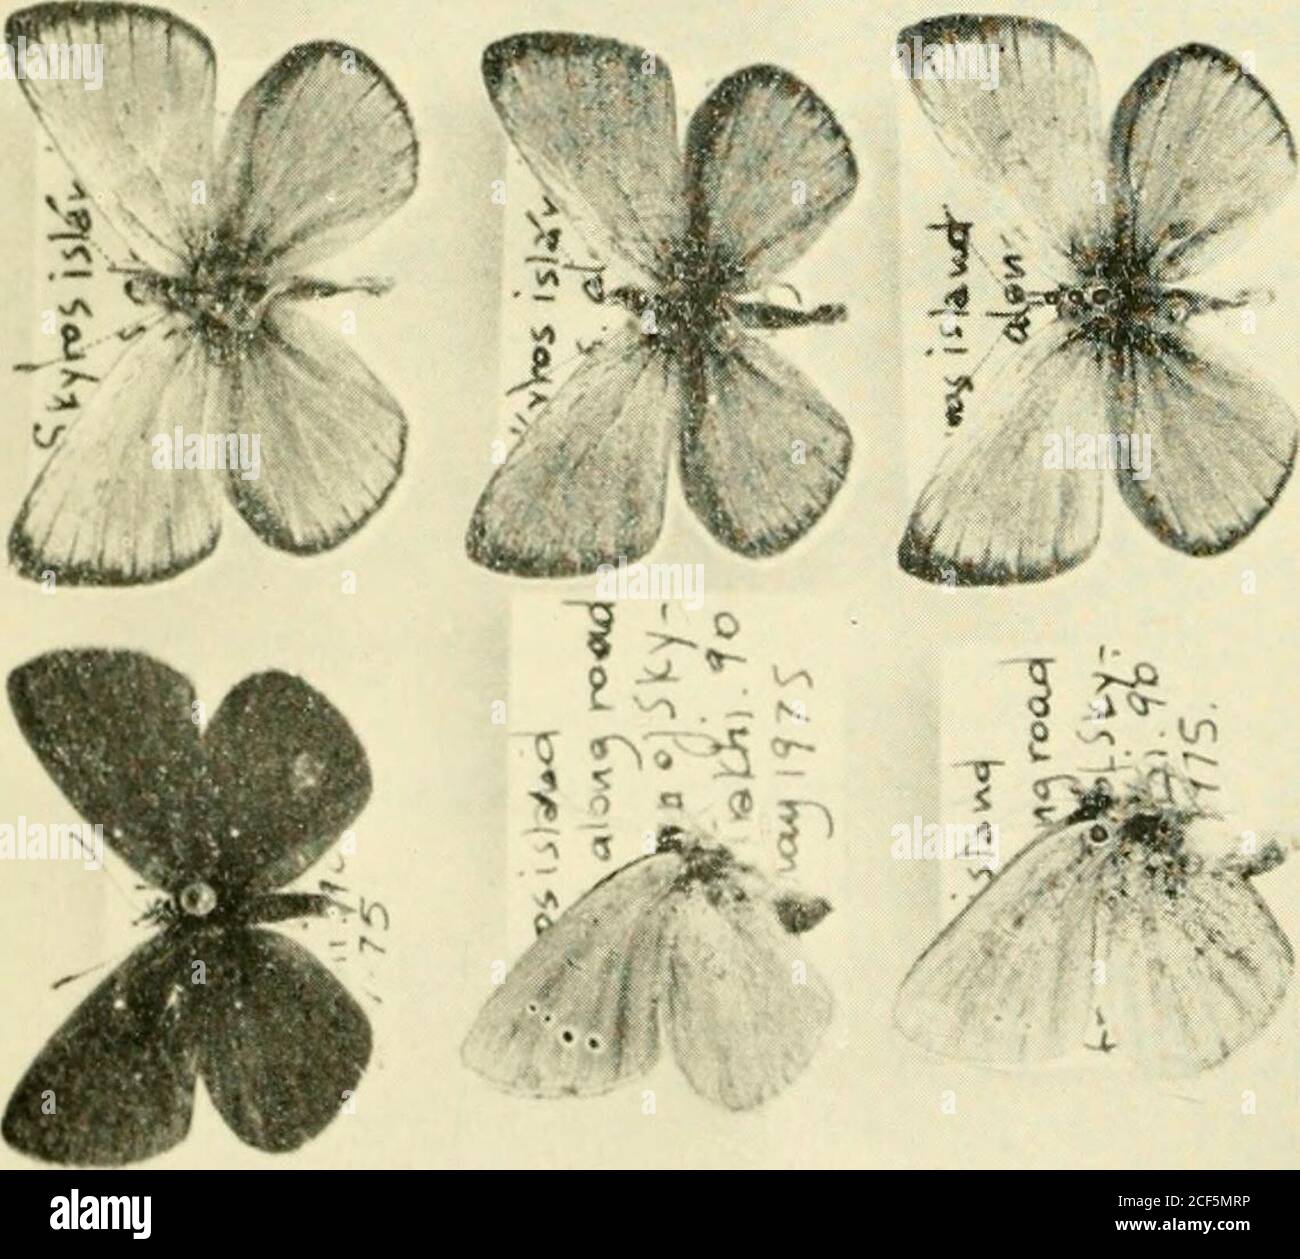 . The Entomologist's record and journal of variation. E fl ? •*• =3B .v , • ? ,1 &lt;s o . t 4 -0. O 4) ^ ^ 2^ D £t3 Q 35 c g.gS-SS § g.* rr D 3 C a) D. • 9 « a. « 3 a• 3 u u 3 a „ &gt;, 0 &gt;&gt;2 2 &gt;.«o csii am 4&gt; -C JS2 0) Q. cs n- 1 u| g uS-^ • ? rr, ? . oo &lt;N -h GO ™ &lt; !H E E E E E E E E c 5 33 Spring Butterflies on the Island of Skyros, GreeceBy John G. Coutsis, M.Arch.* The island of Skyros is situated in the Aegean sea atapproximately 39 degrees of latitude north and 25 degrees oflongitude east and has an area of about 200 square kilometres.It is separated from the Greek m Stock Photo